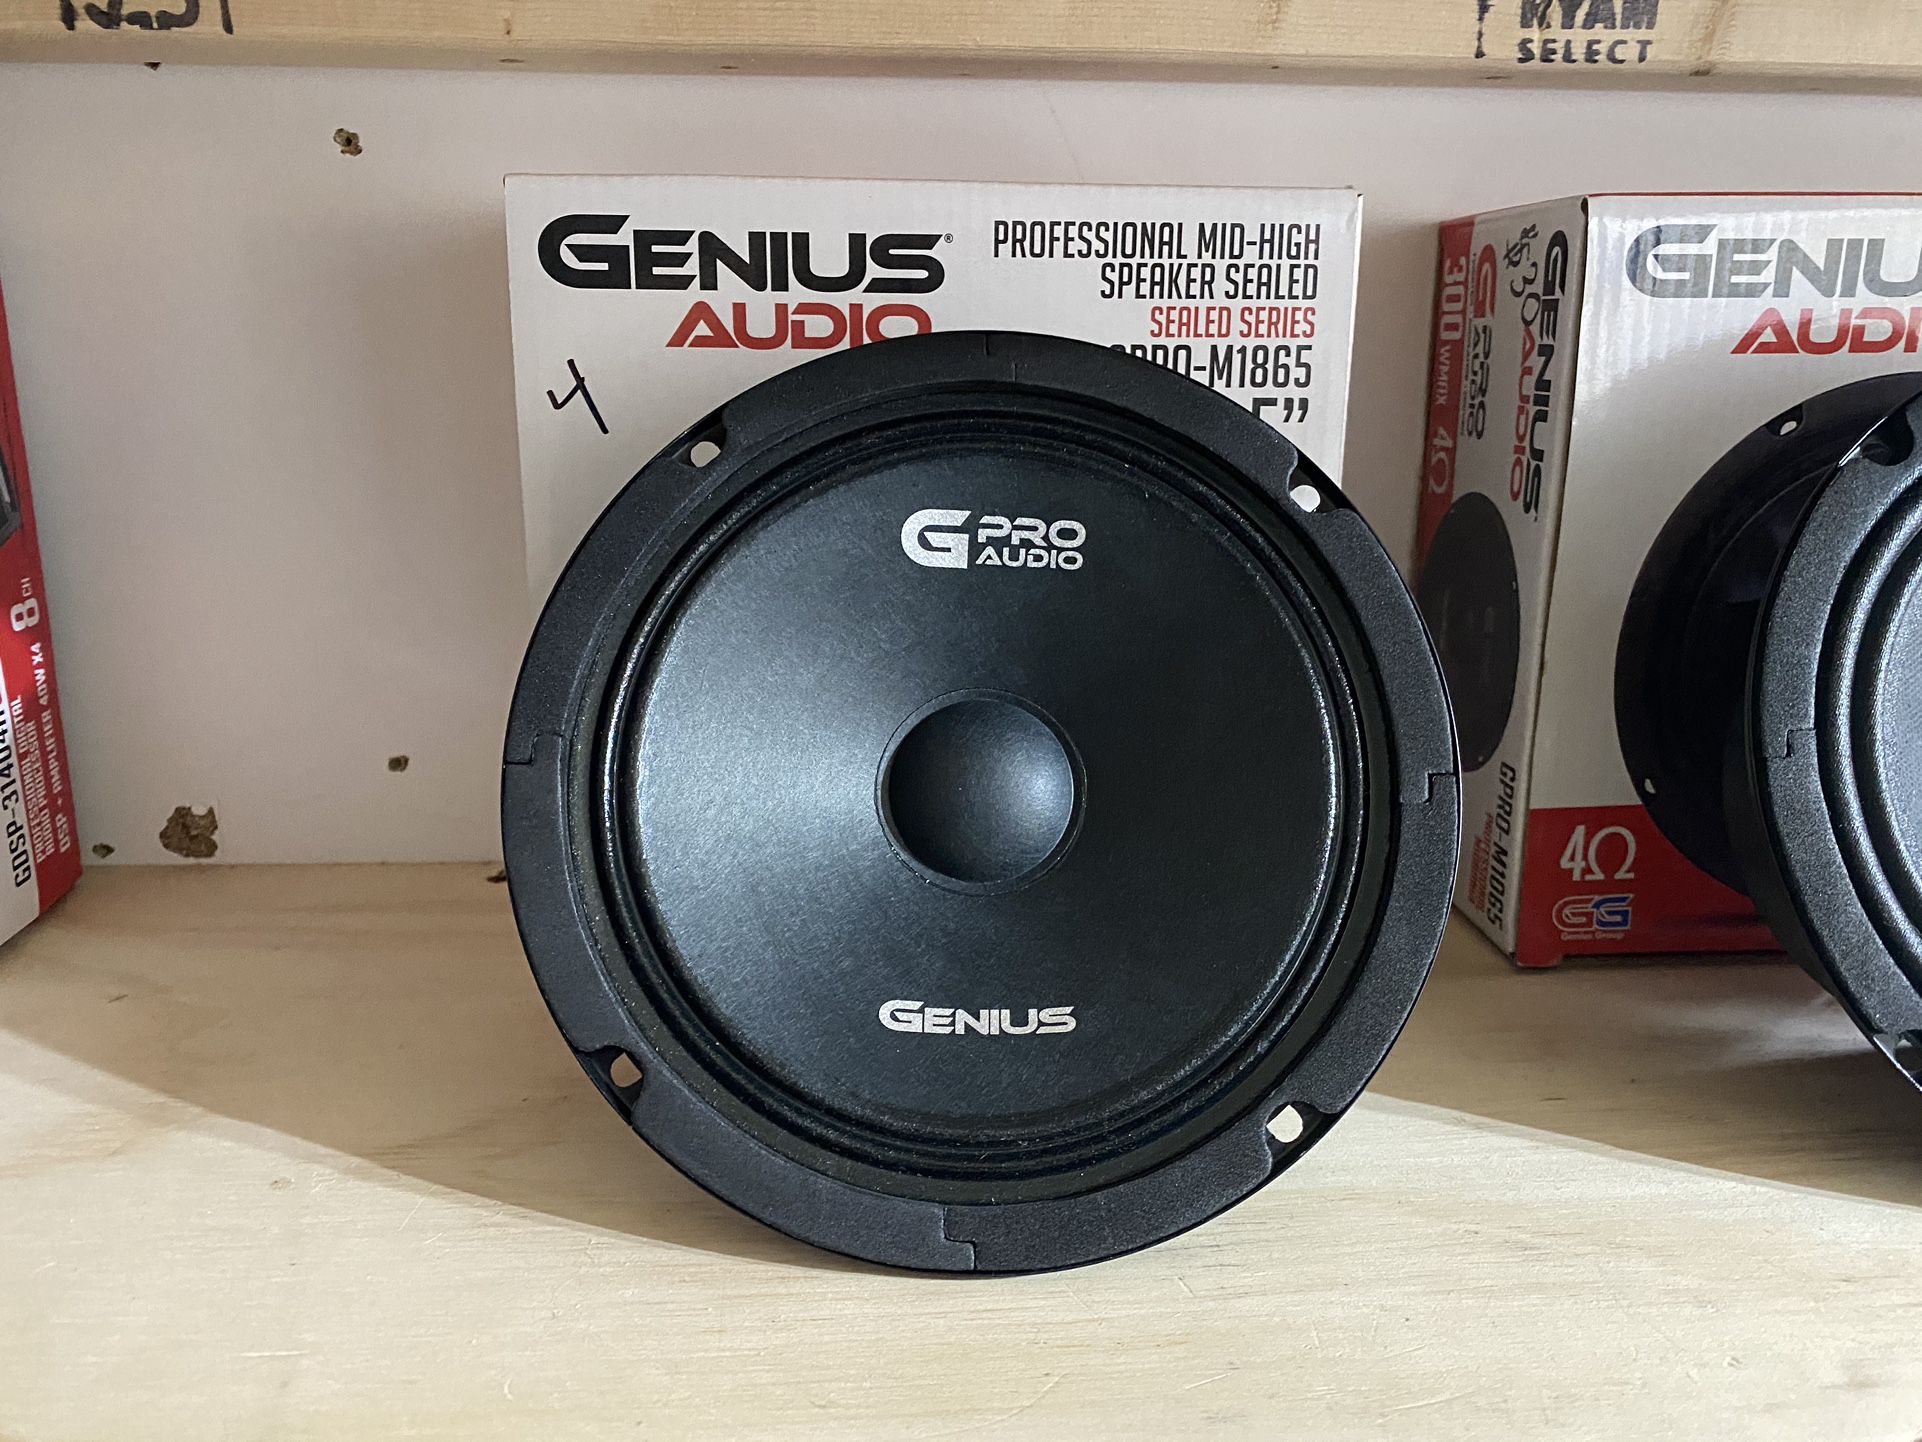 Sold Out New 6.5" Genius Audio Sealed Back High Frequency Midrange Speaker  $30 each  